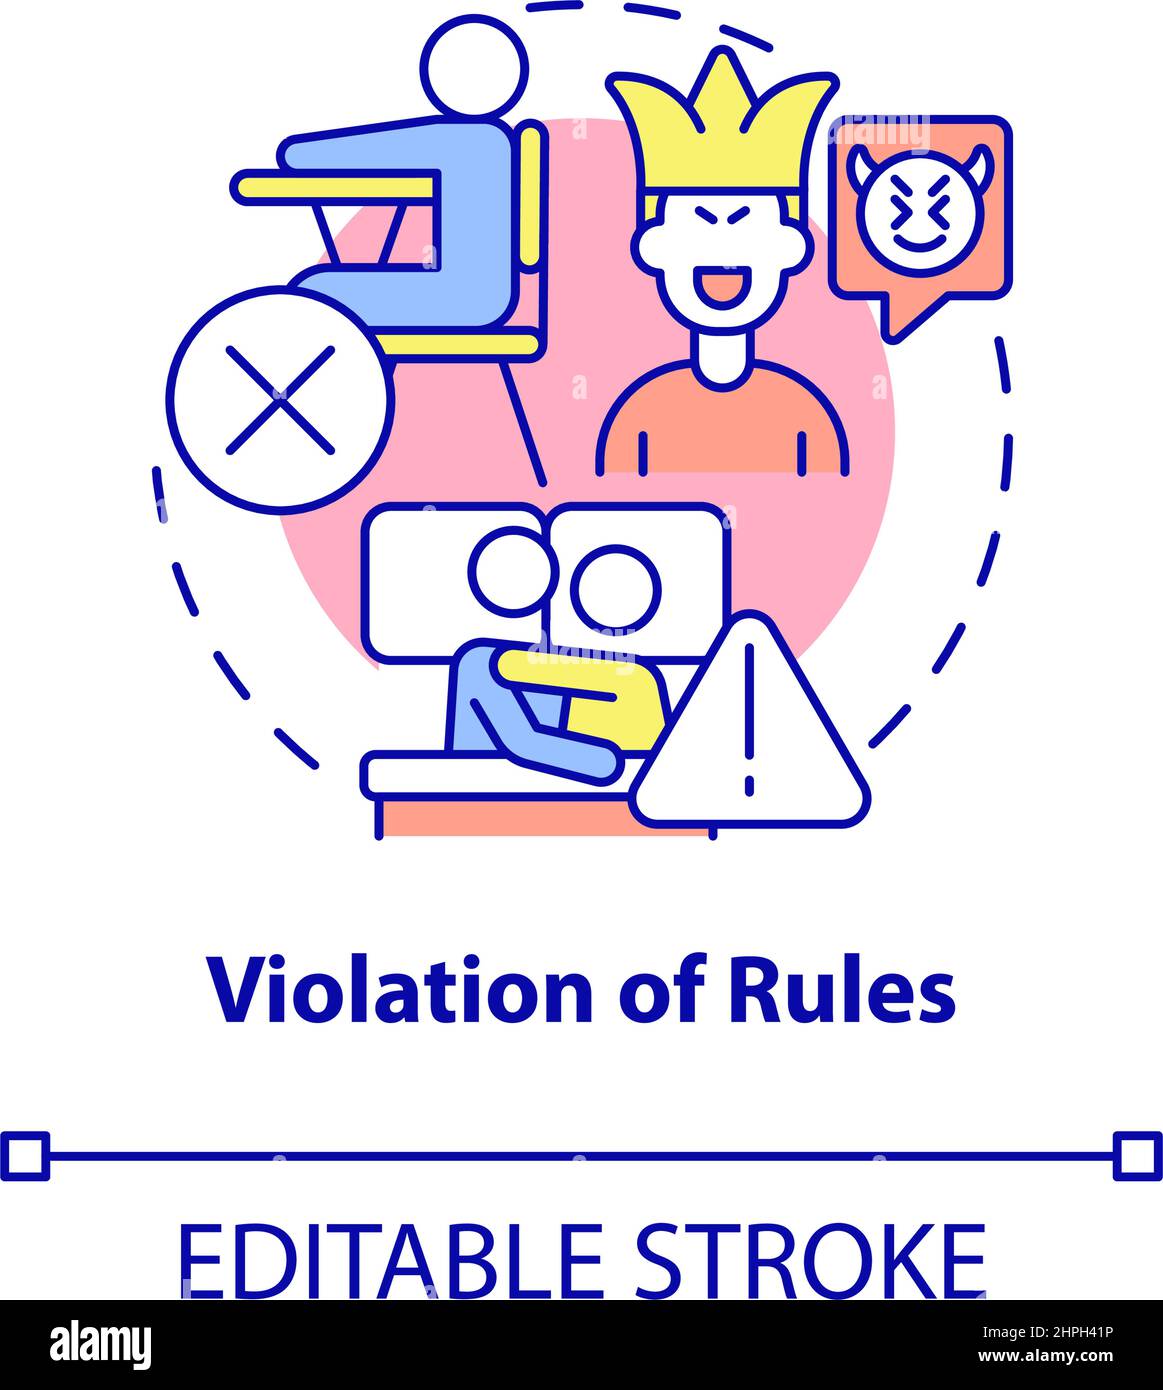 Violation of rules concept icon Stock Vector